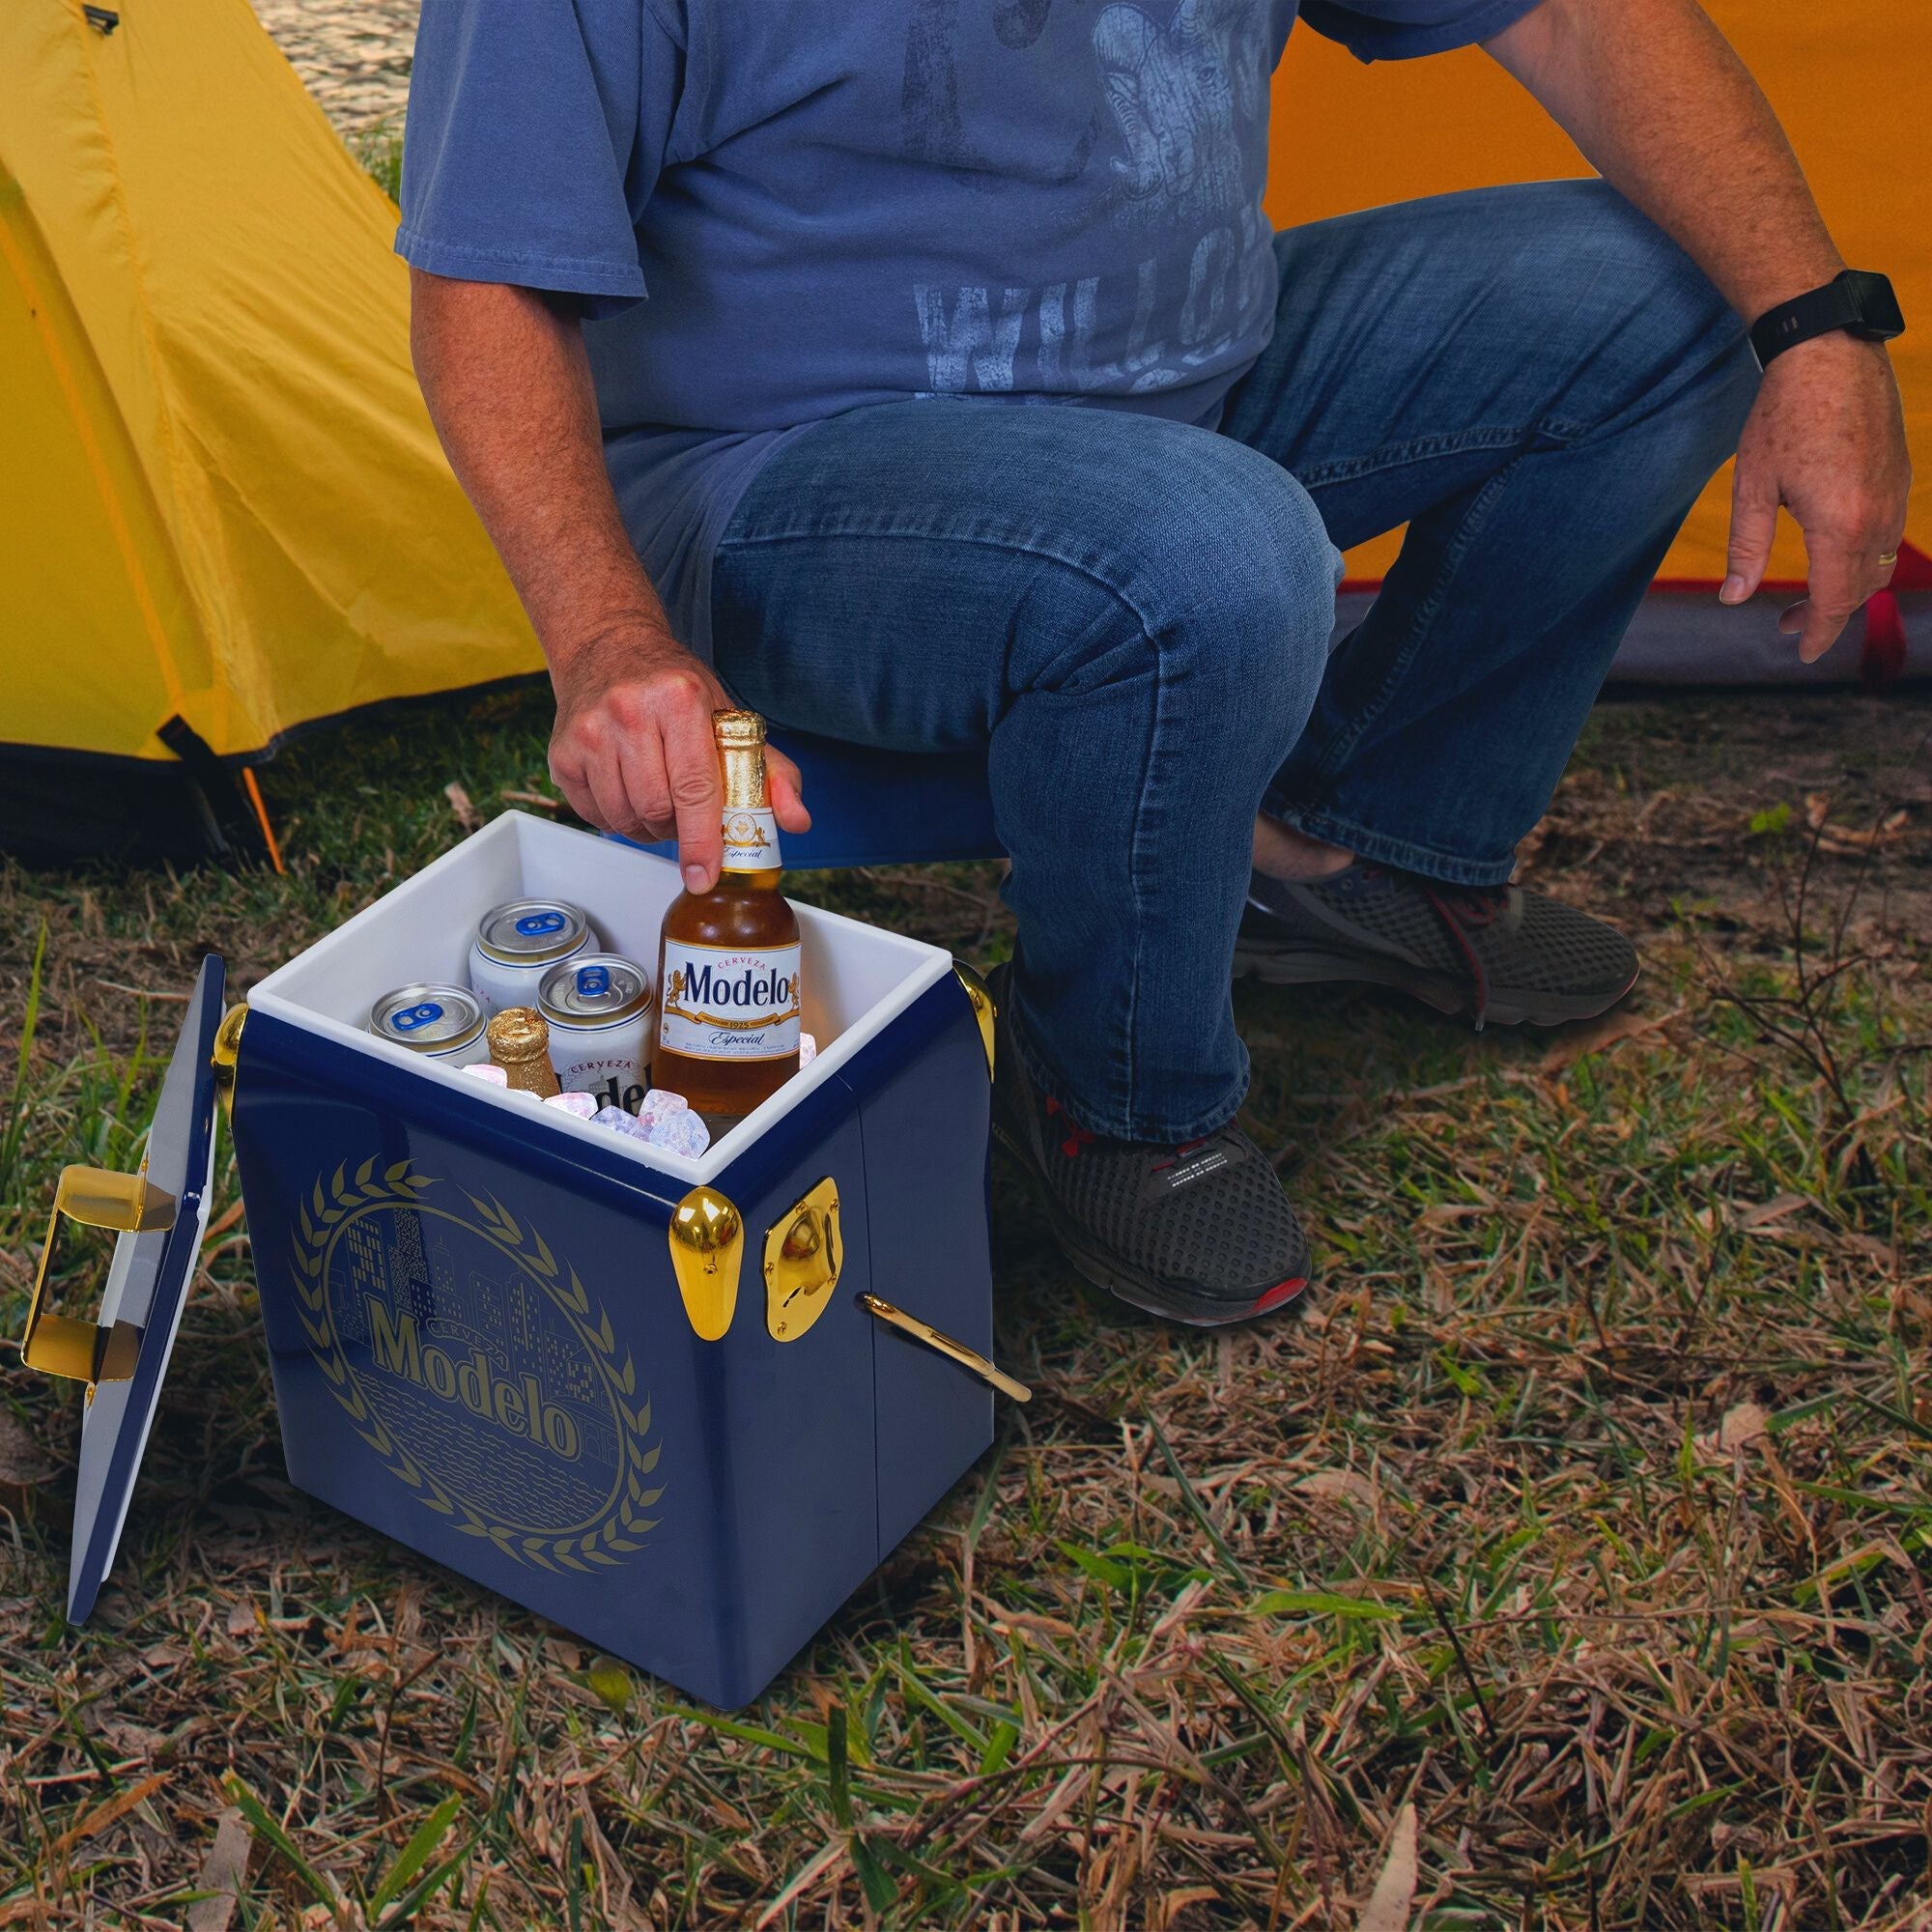 Lifestyle image of a person wearing jeans and a blue t-shirt sitting in front of two yellow dome tents and lifting a bottle of Modelo beer out of the open ice chest